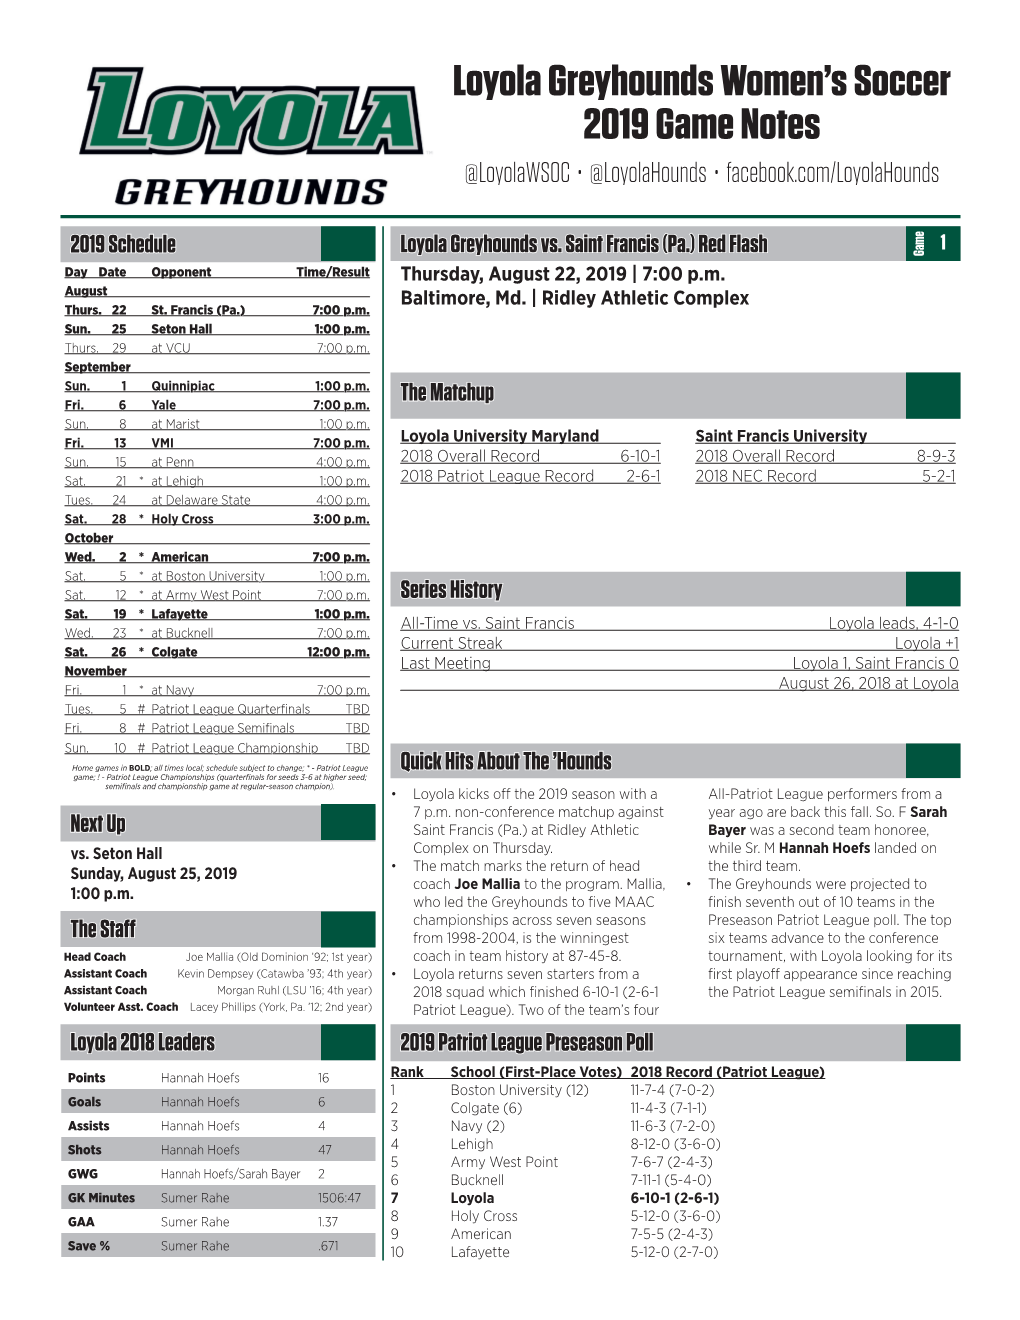 Loyola Greyhounds Women's Soccer 2019 Game Notes